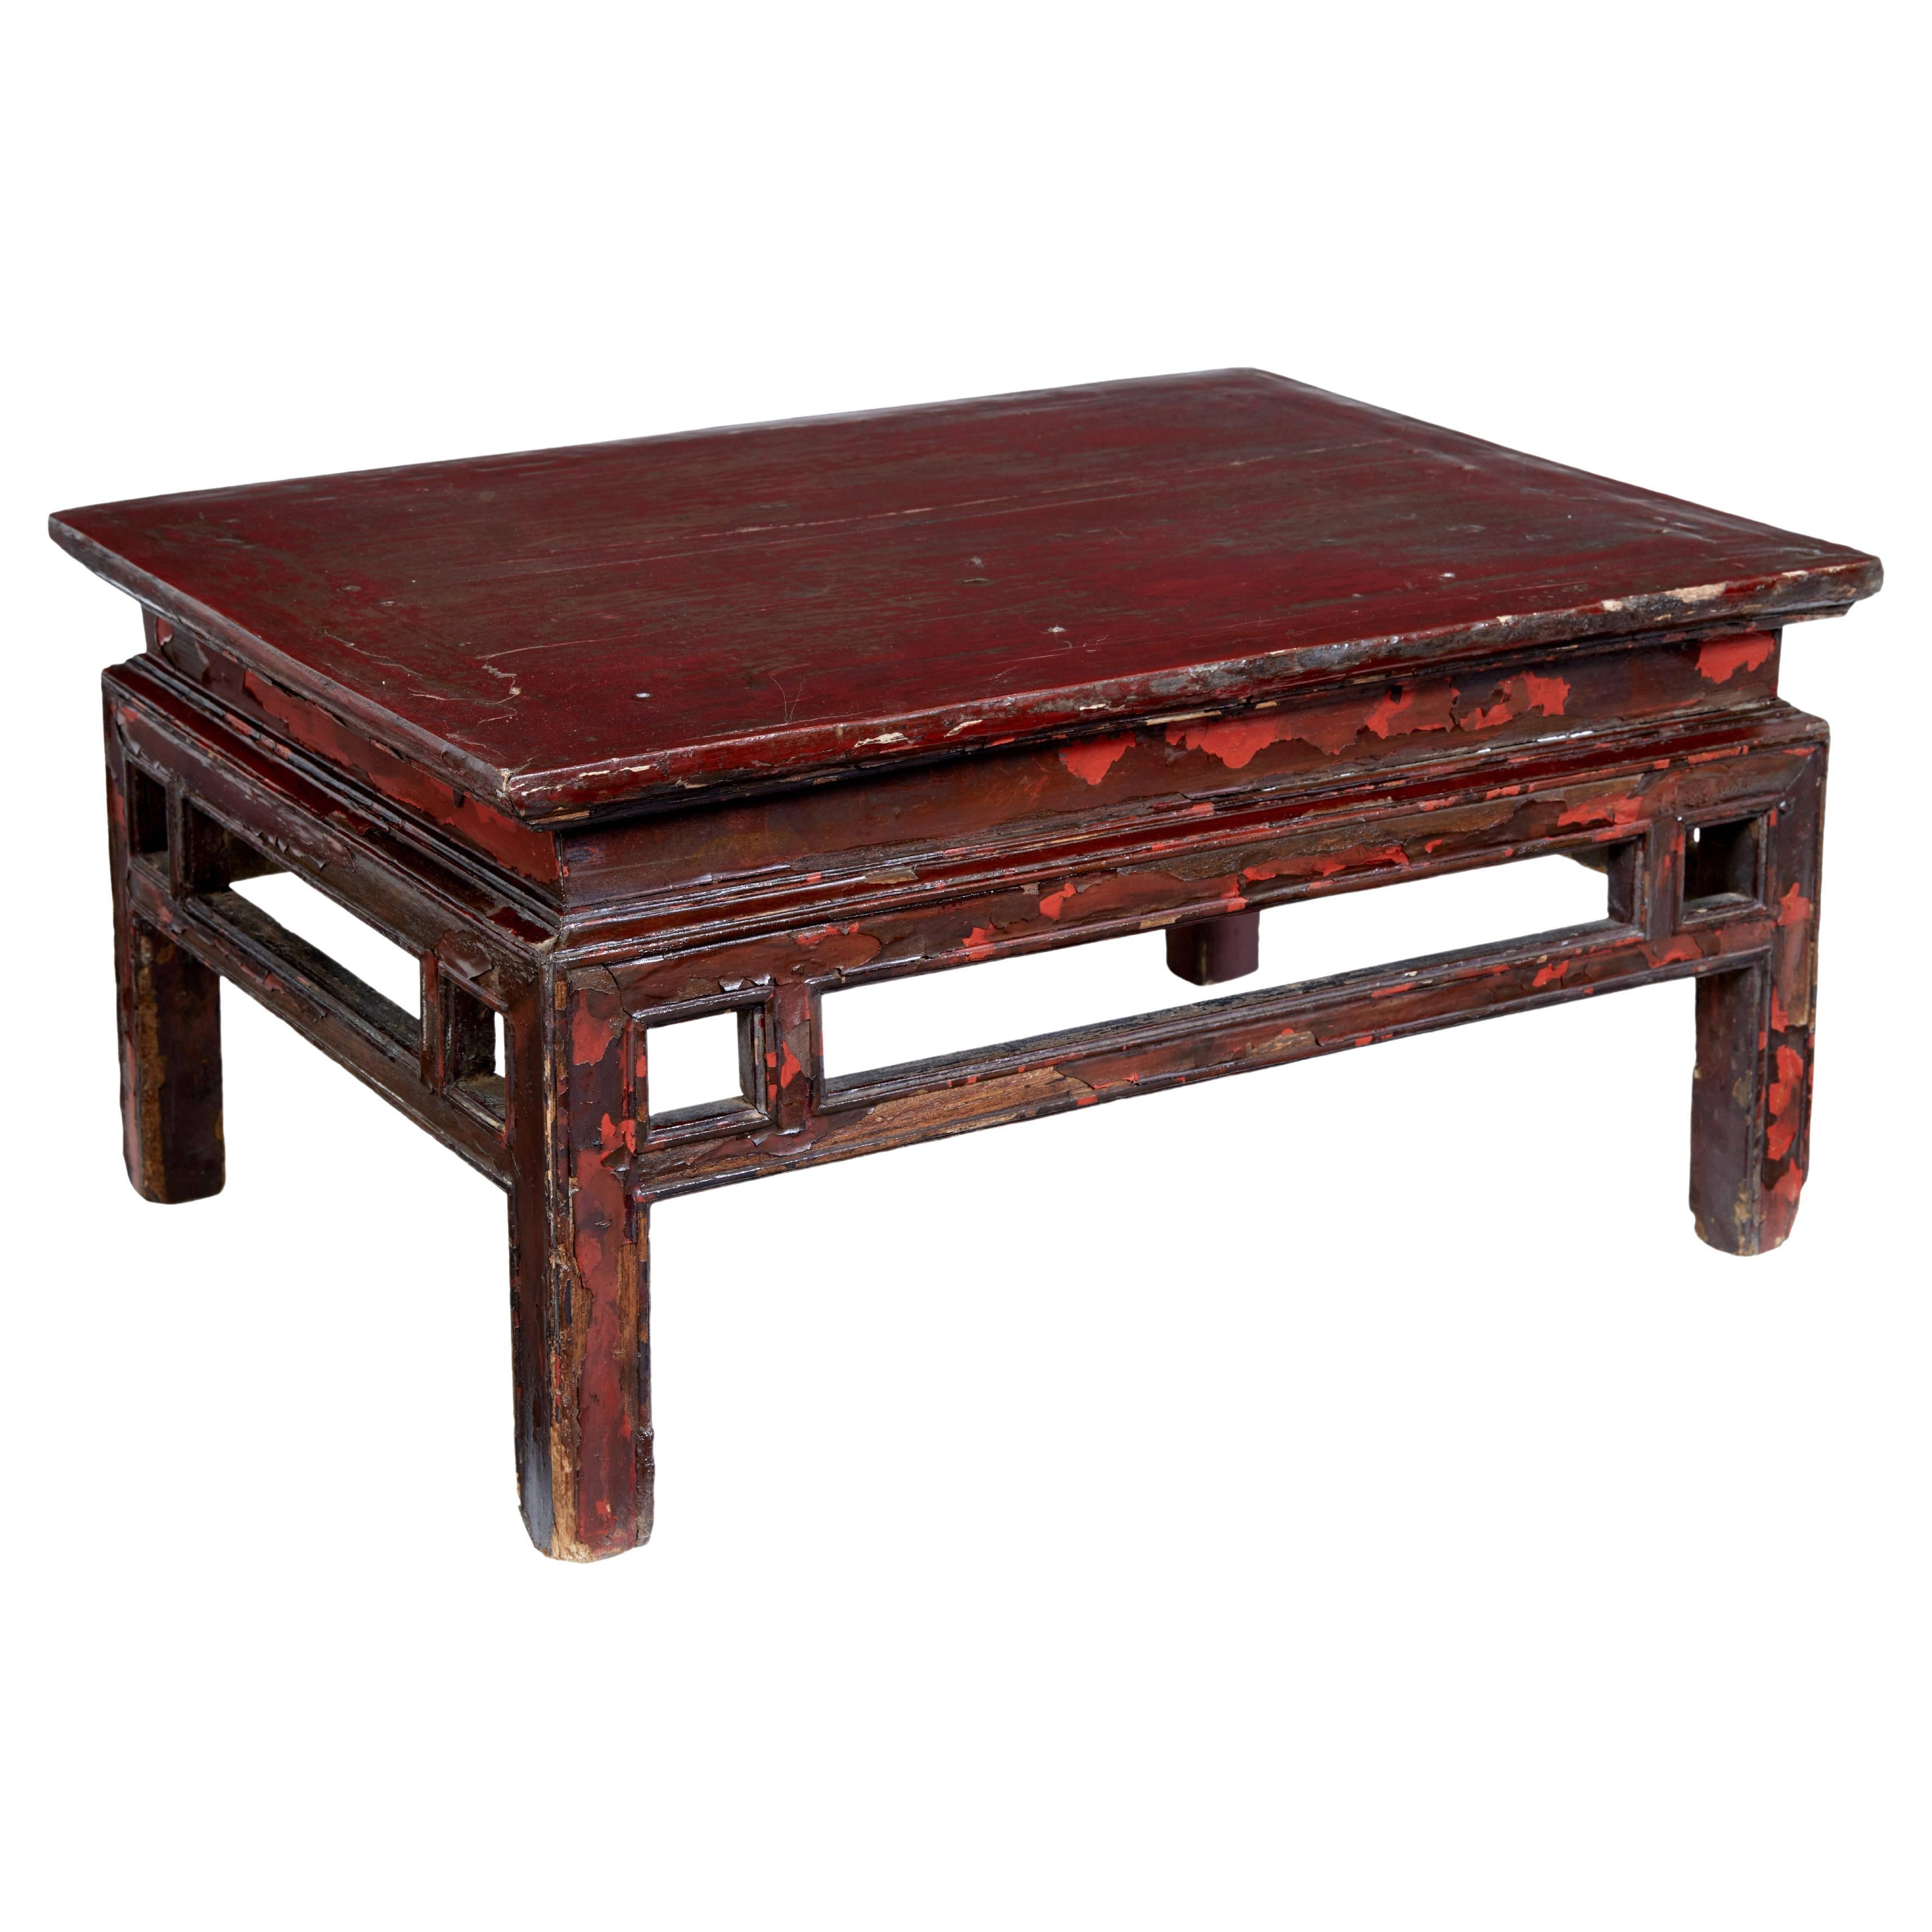 18th Century red lacquer low occasional table